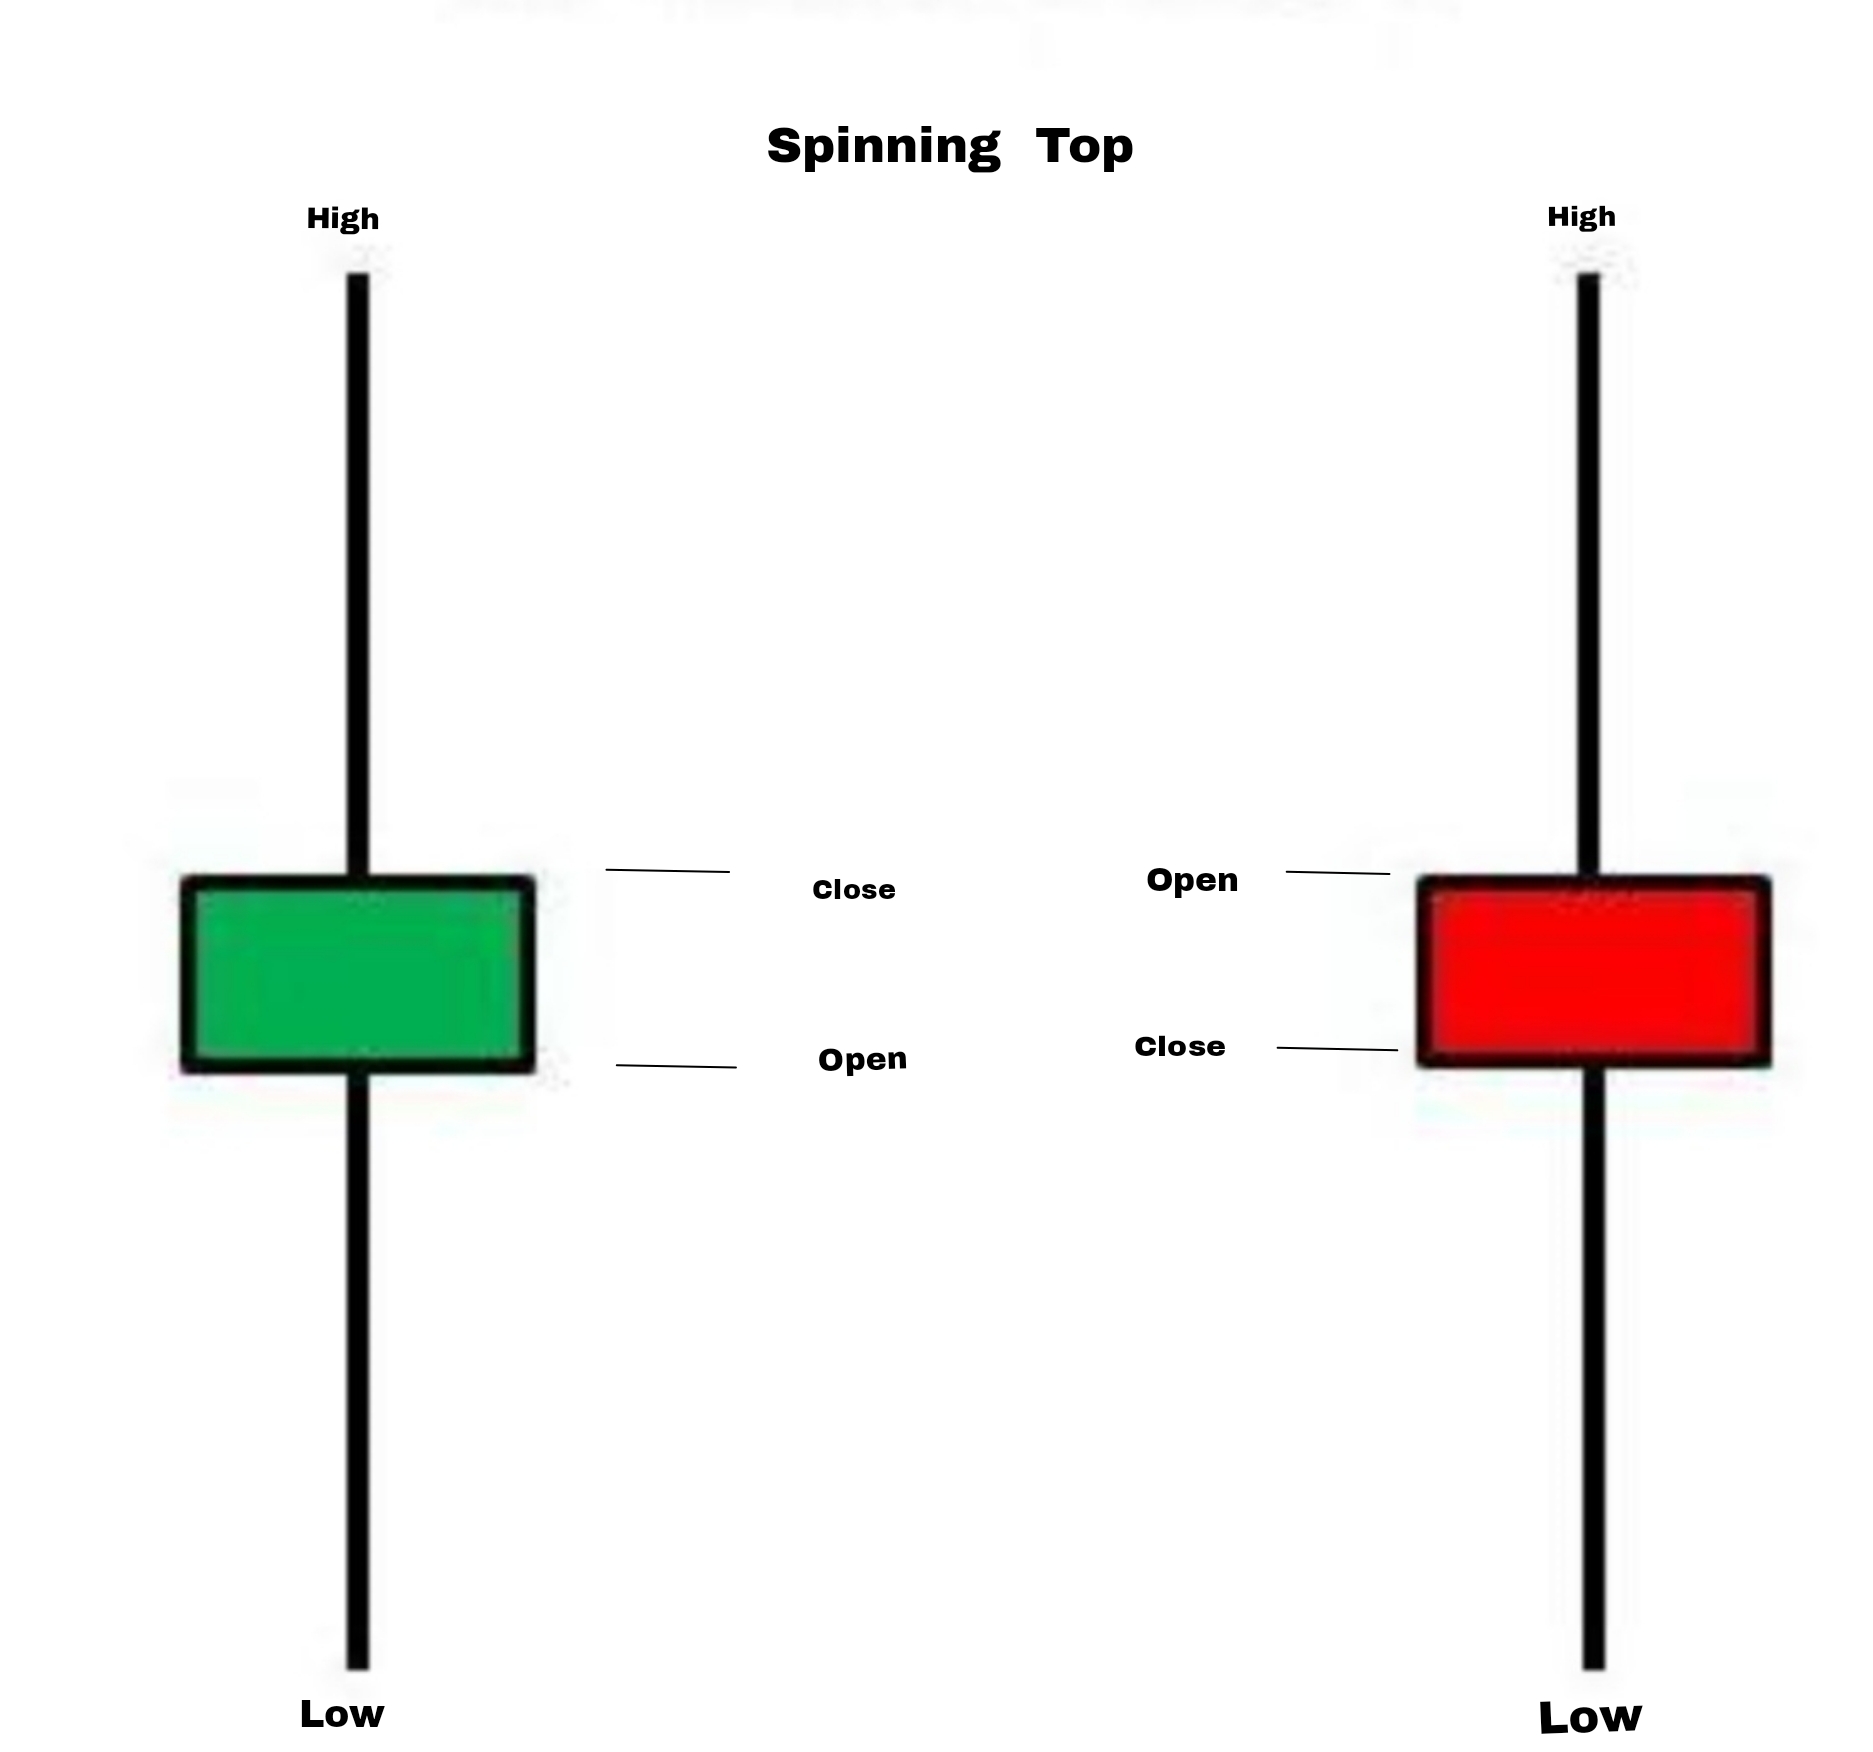 SPINNING TOP CANDLESTICK PATTERN